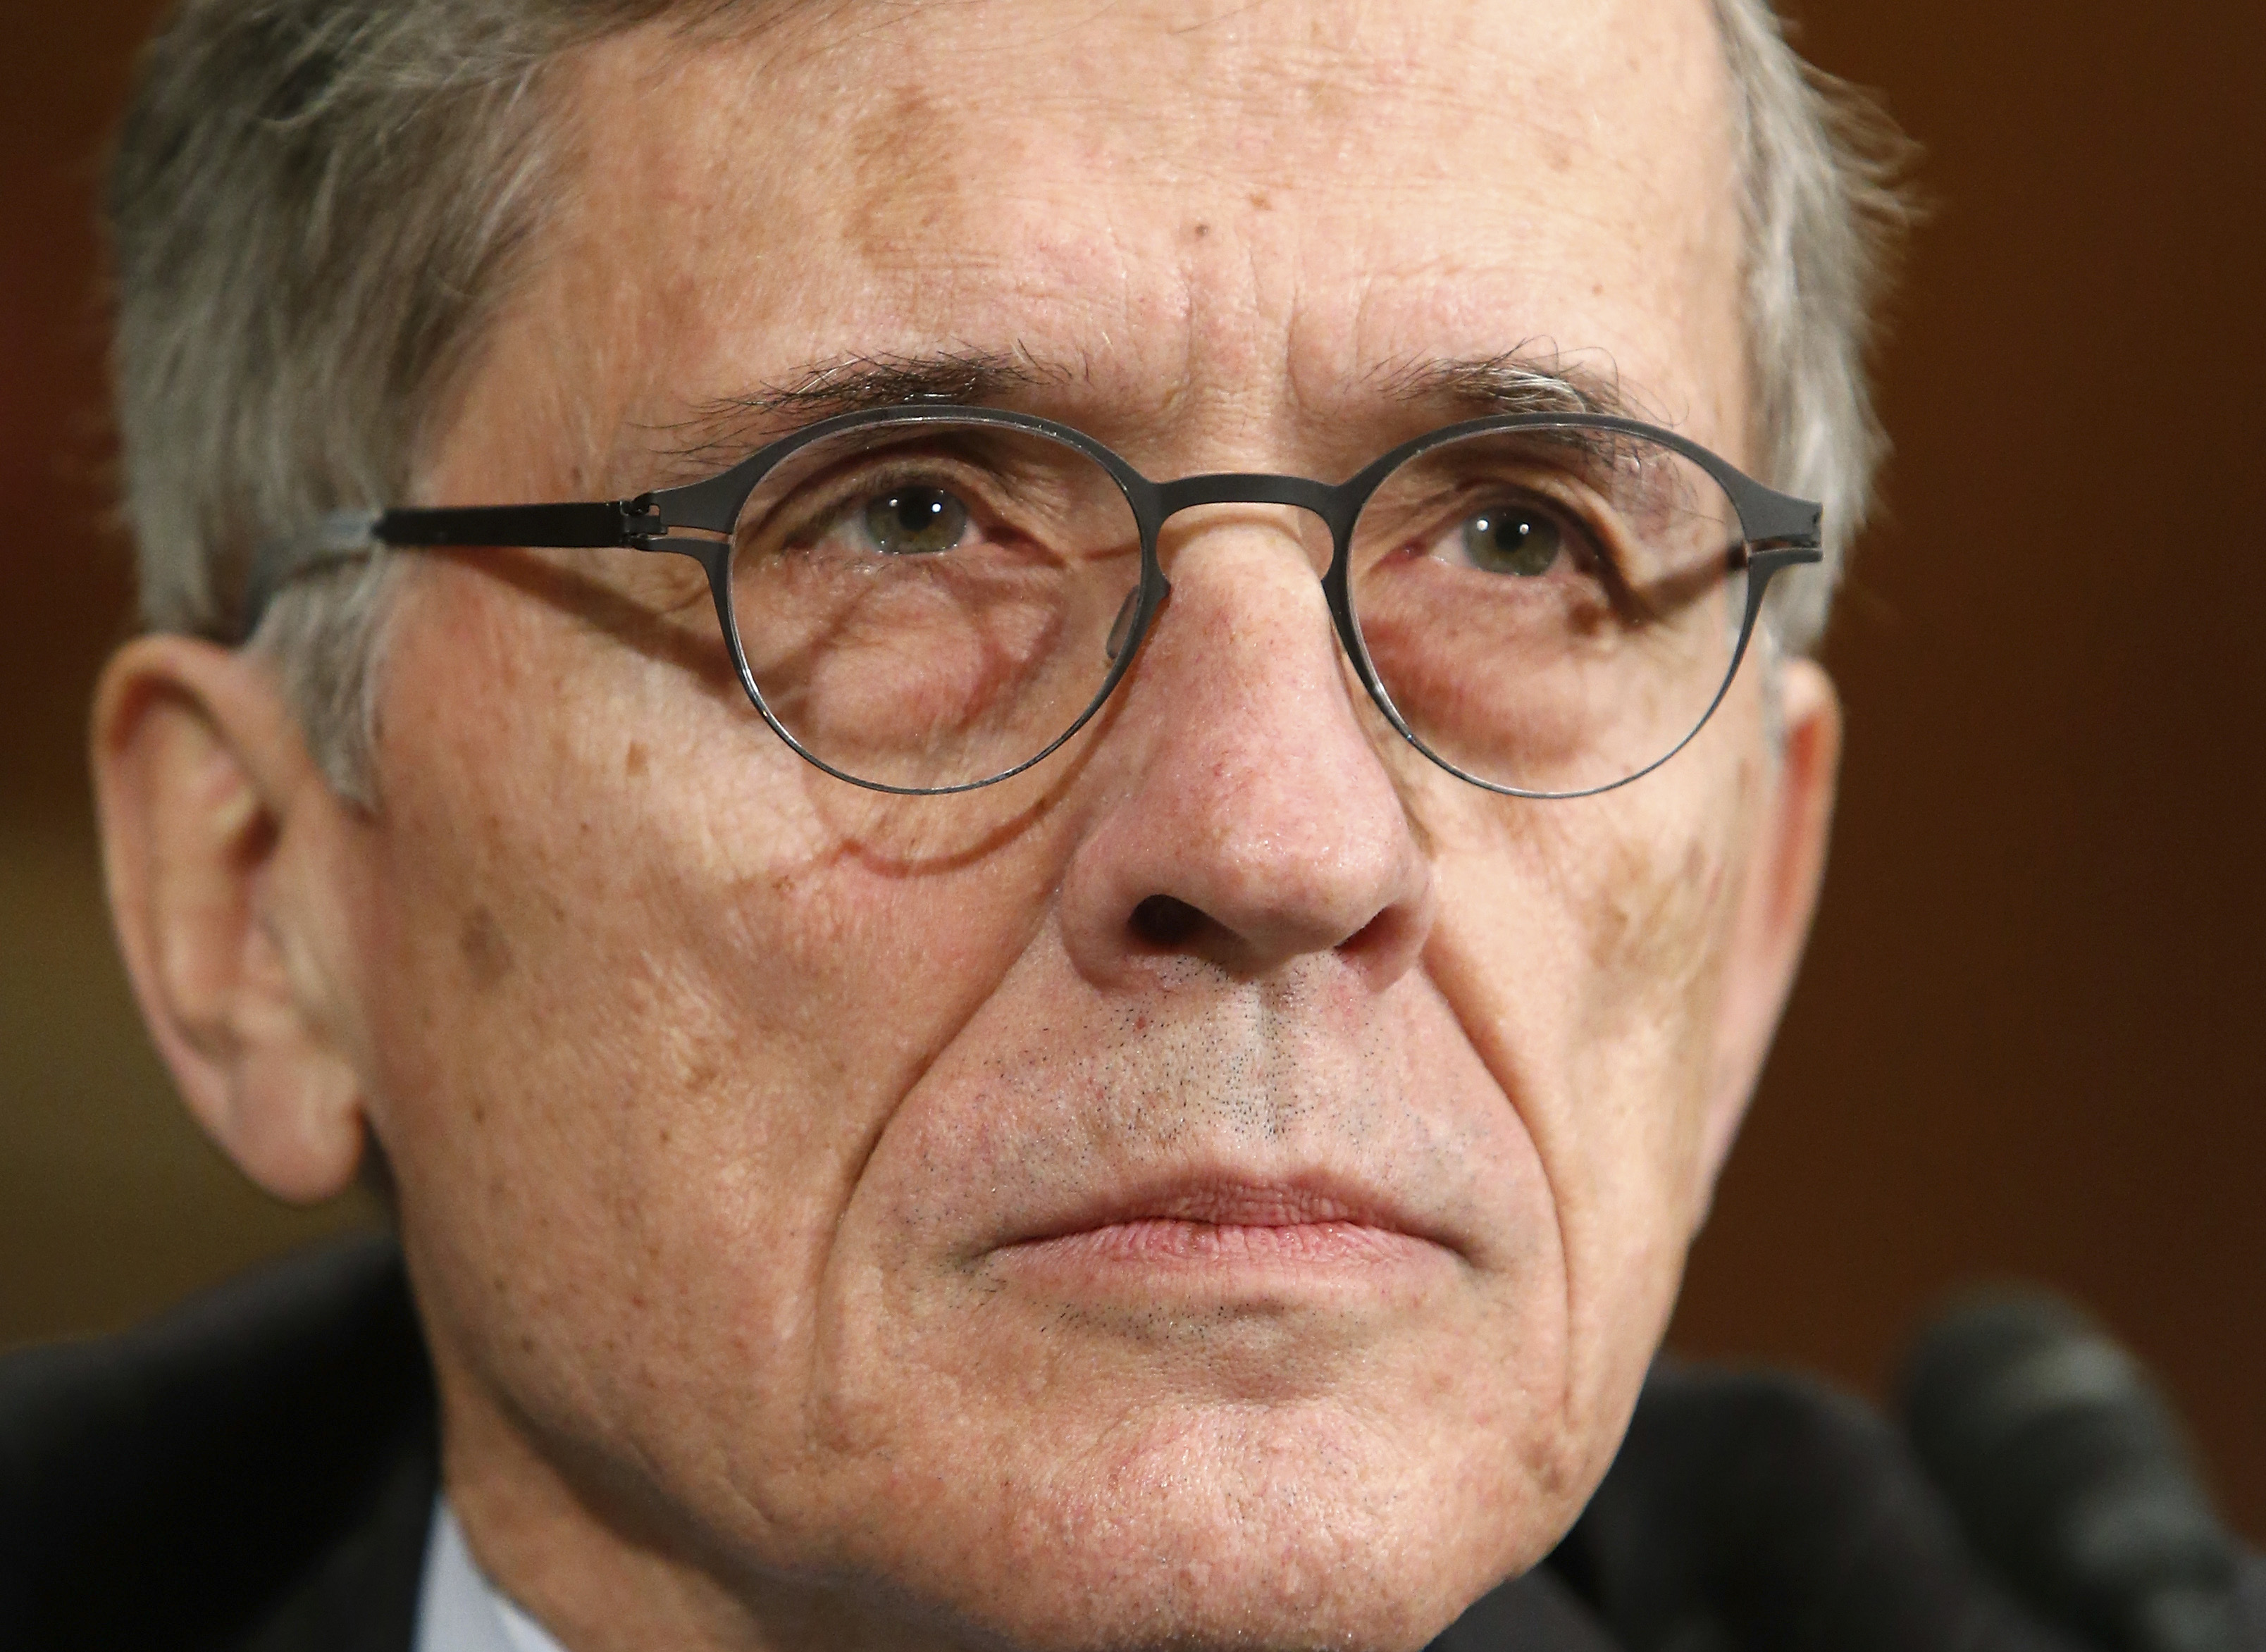 Federal Communications Commission (FCC) Chairman Tom Wheeler testifies before a Senate Appropriations Financial Services and General Government Subcommittee hearing on the FY2015 budget justification for the FCC, on Capitol Hill in Washington March 27, 2014. (Jonathan Ernst—Reuters)